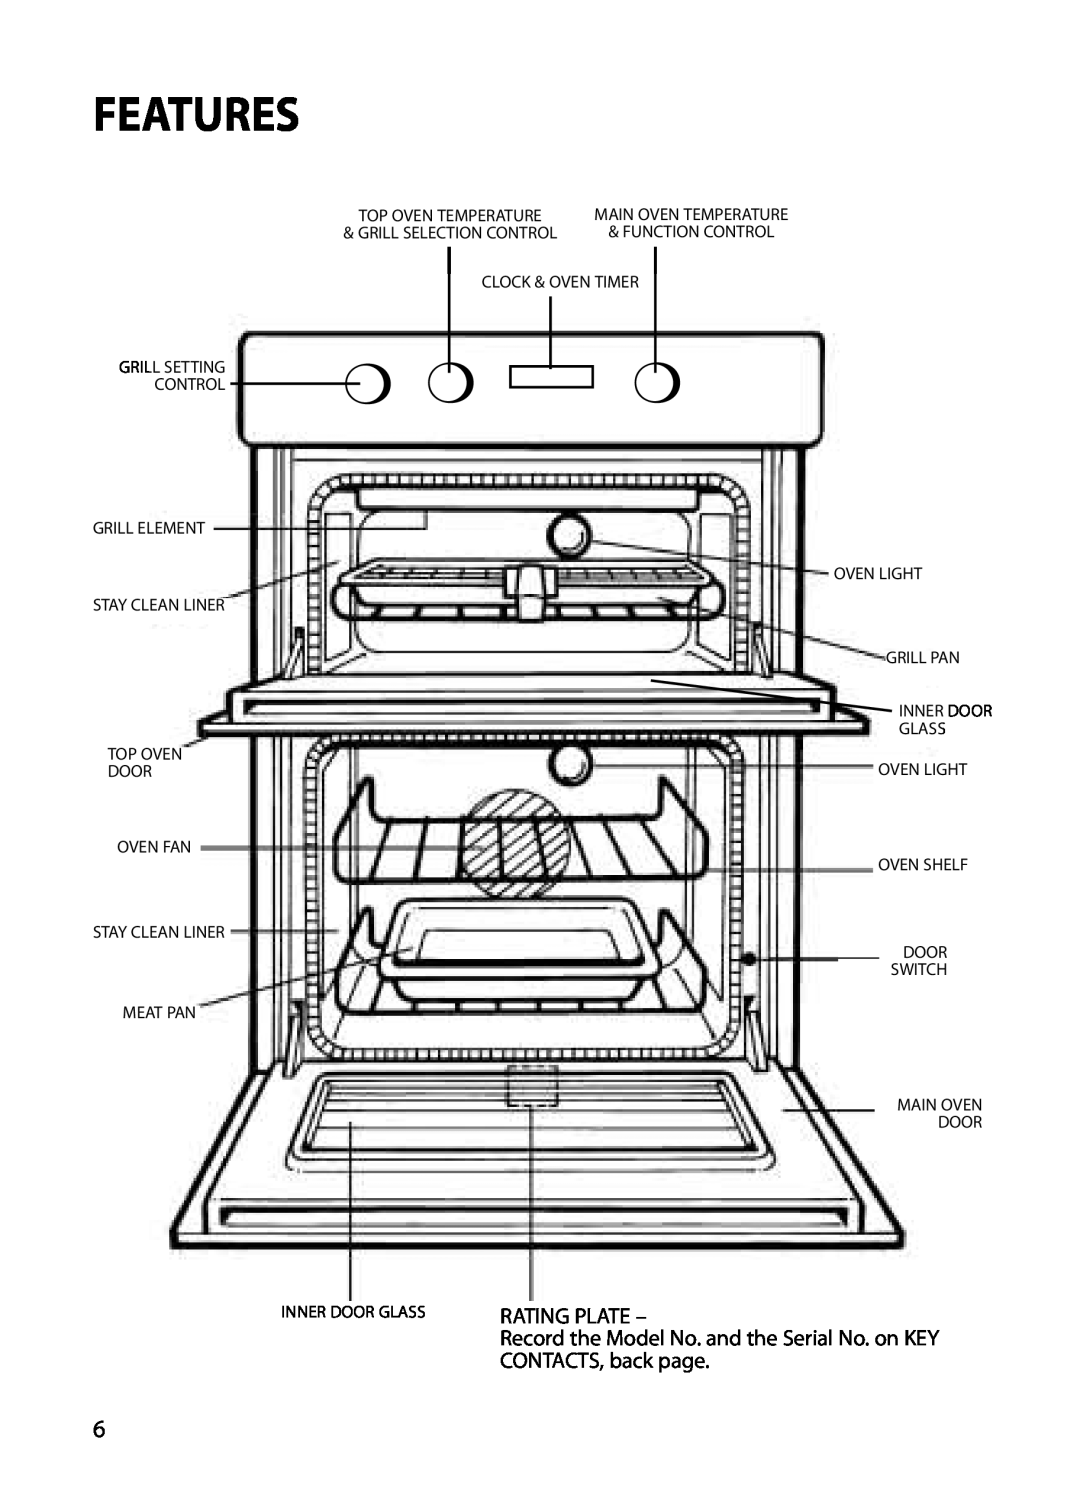 Hotpoint BU82 BU72 BU71 Features, Grill Setting Control Grill Element Stay Clean Liner Top Oven Door, Clock & Oven Timer 